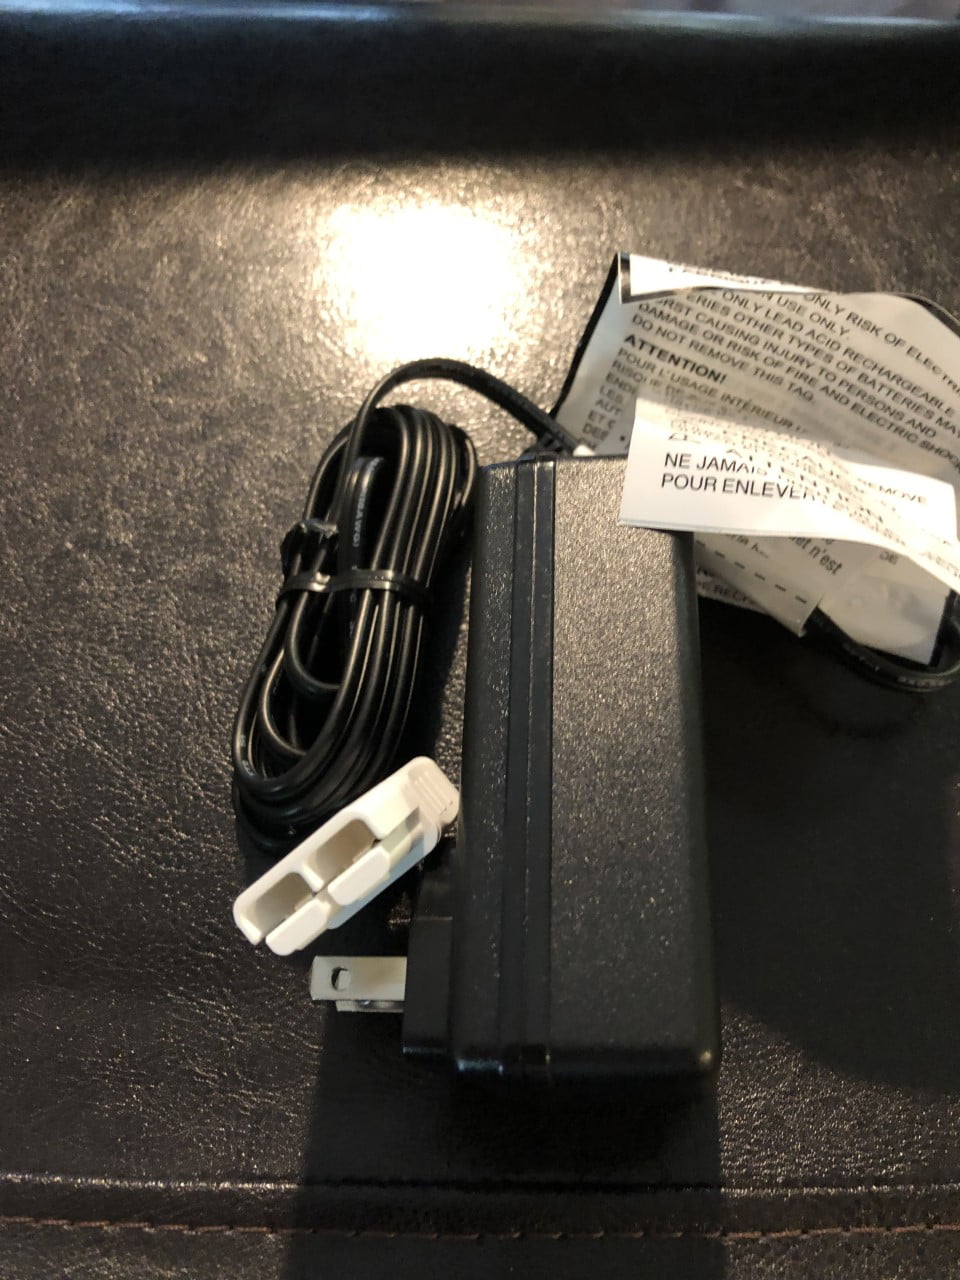 rollplay 12v battery charger